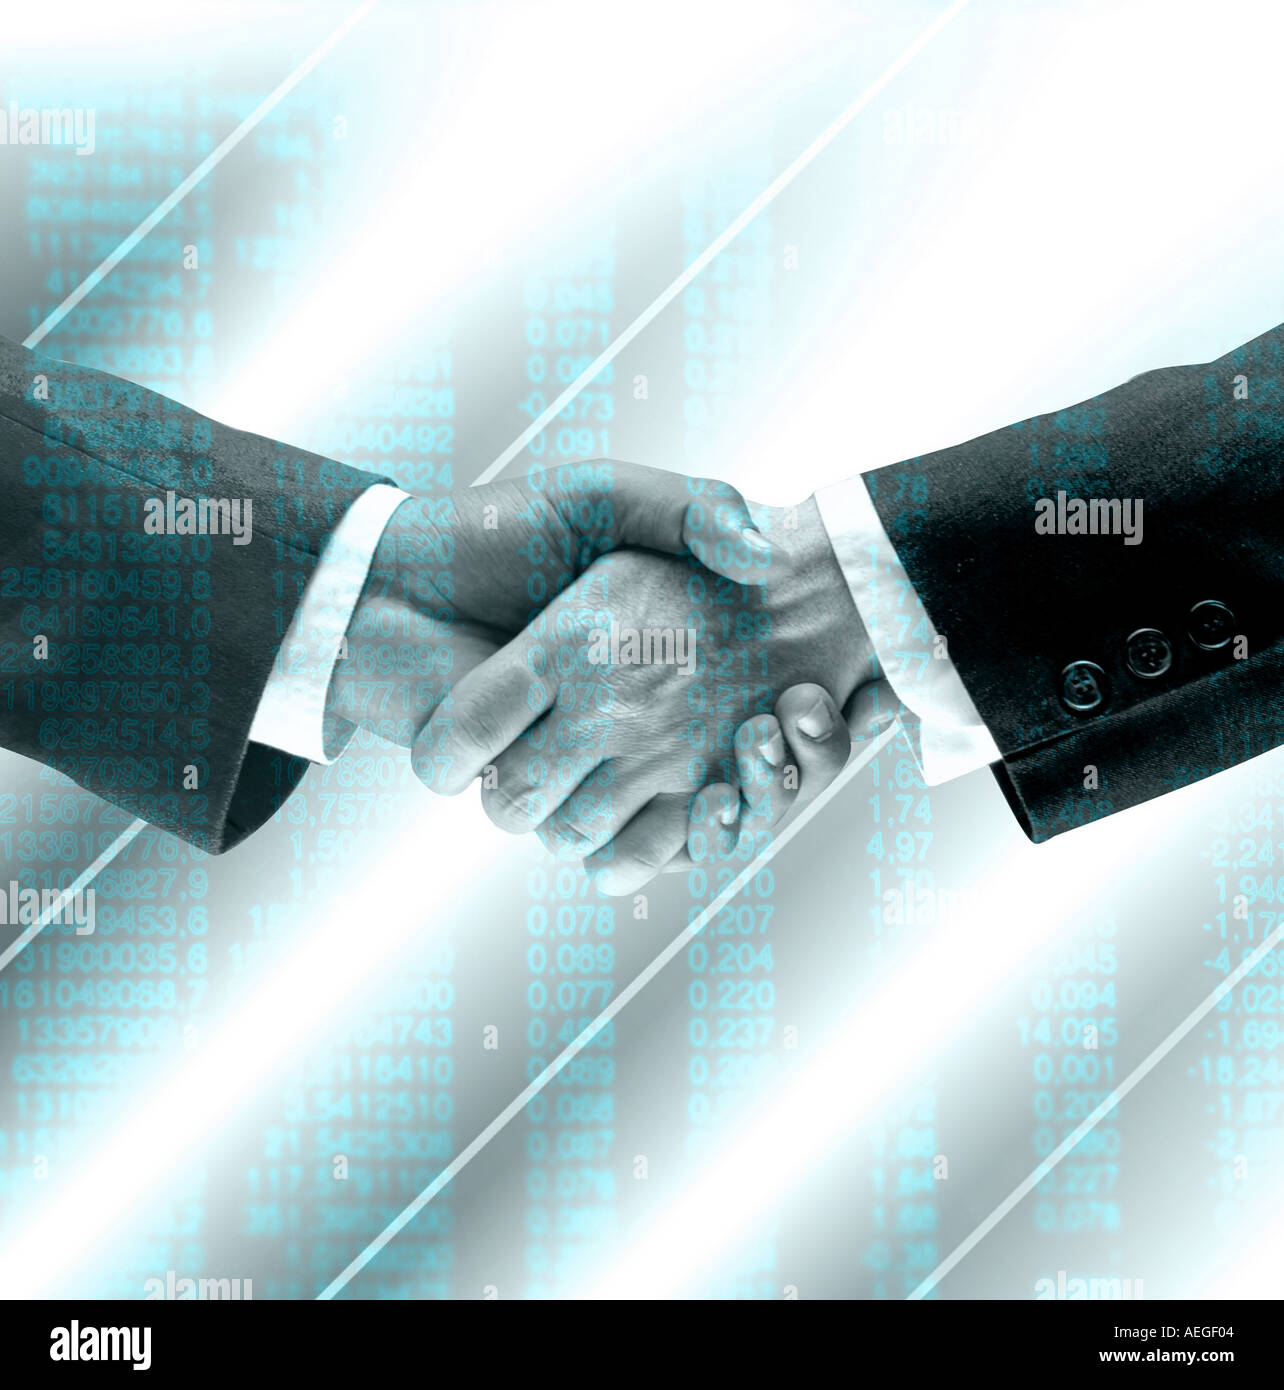 Office able handshake deal overlapping agreement pact unanimity figures businessman businessmen conceptual team work business co Stock Photo